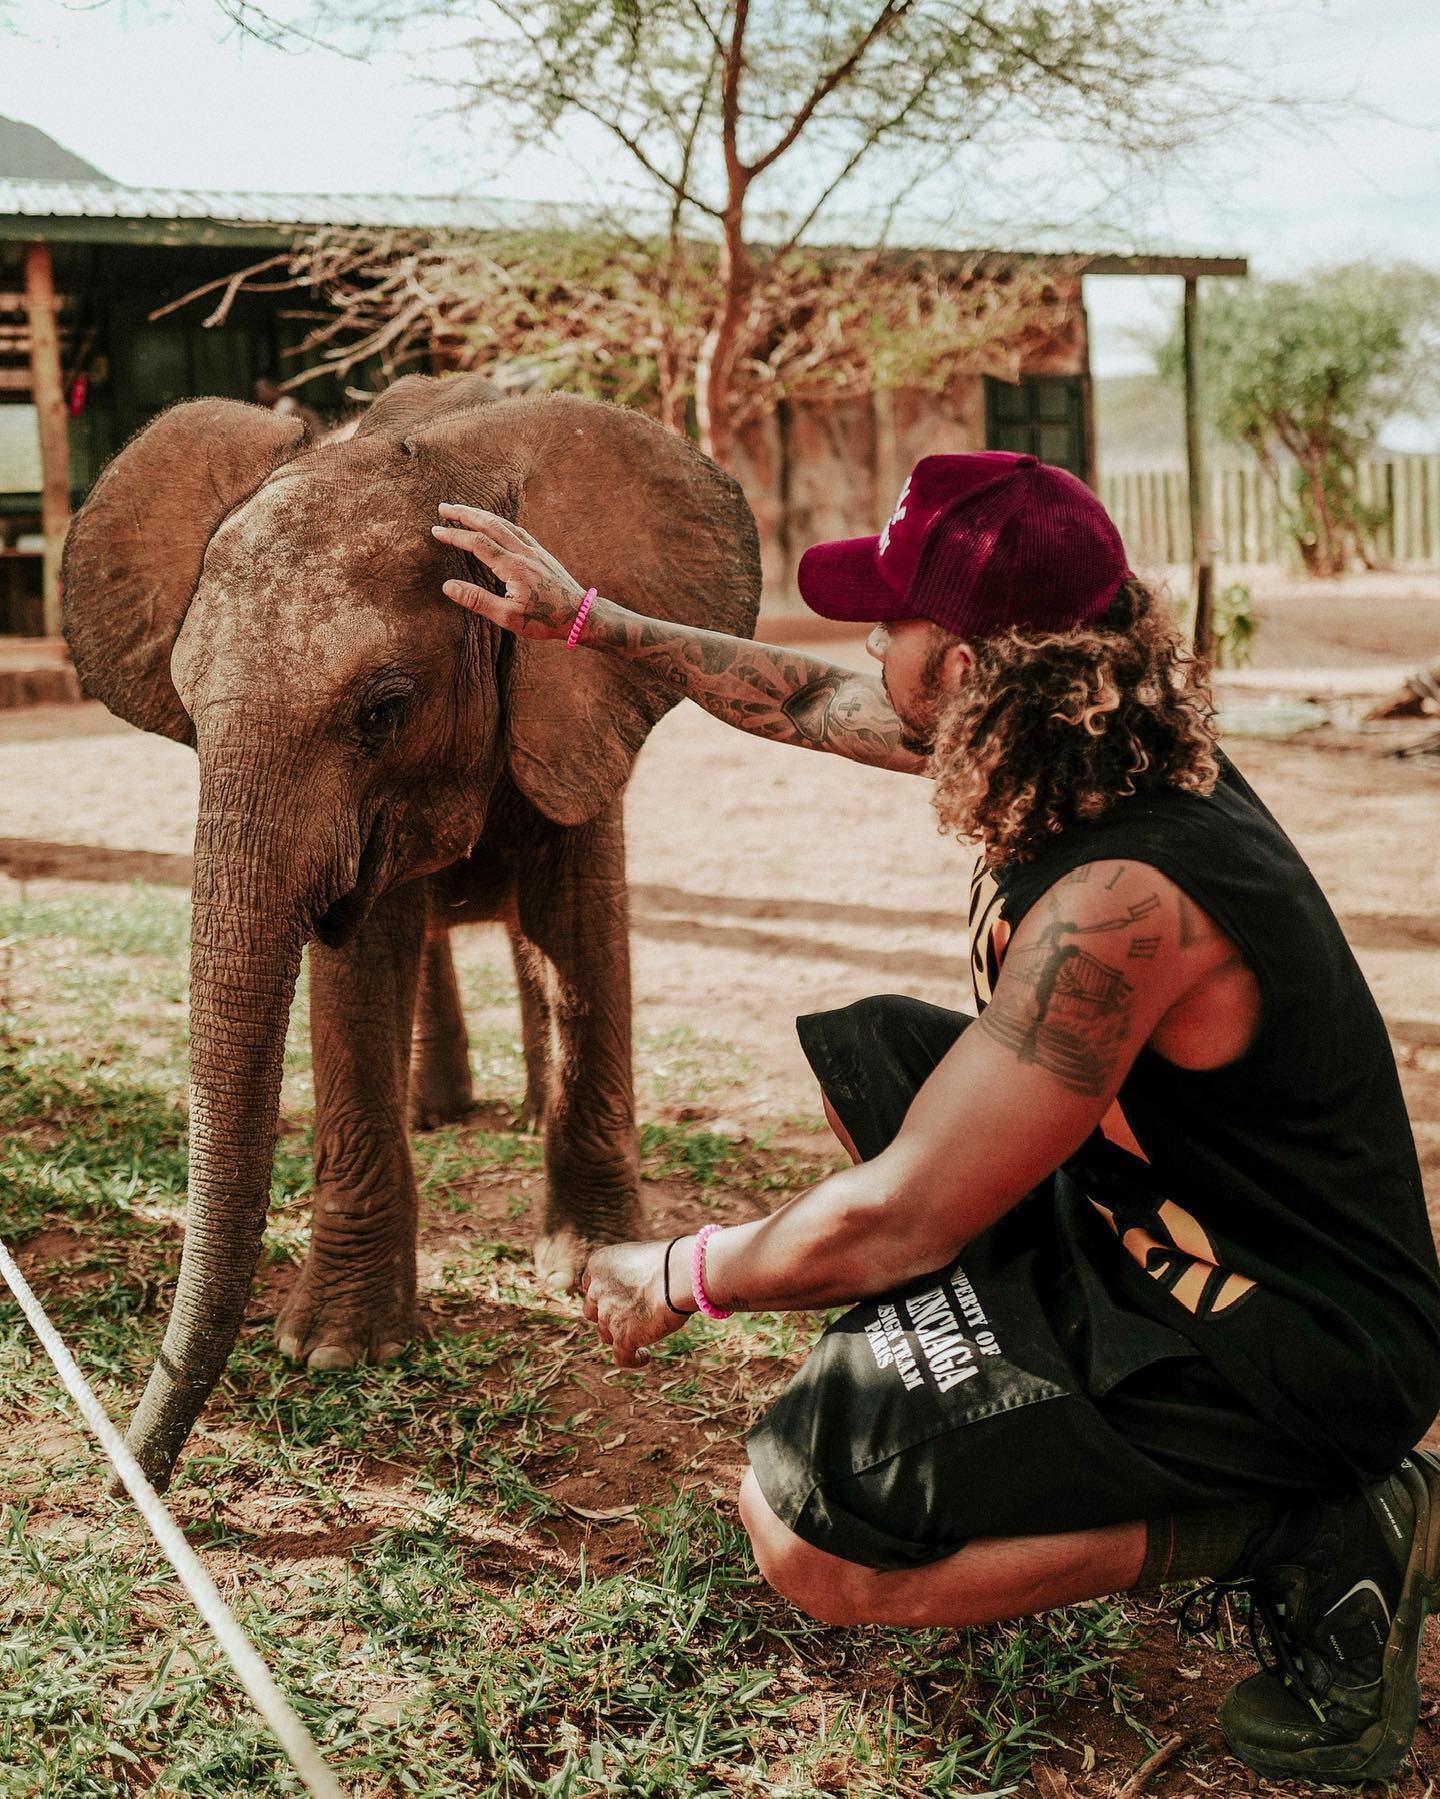 , Fans all say the same thing as Lewis Hamilton reveals dramatic new hairdo as he pets baby giraffe and elephant in Kenya